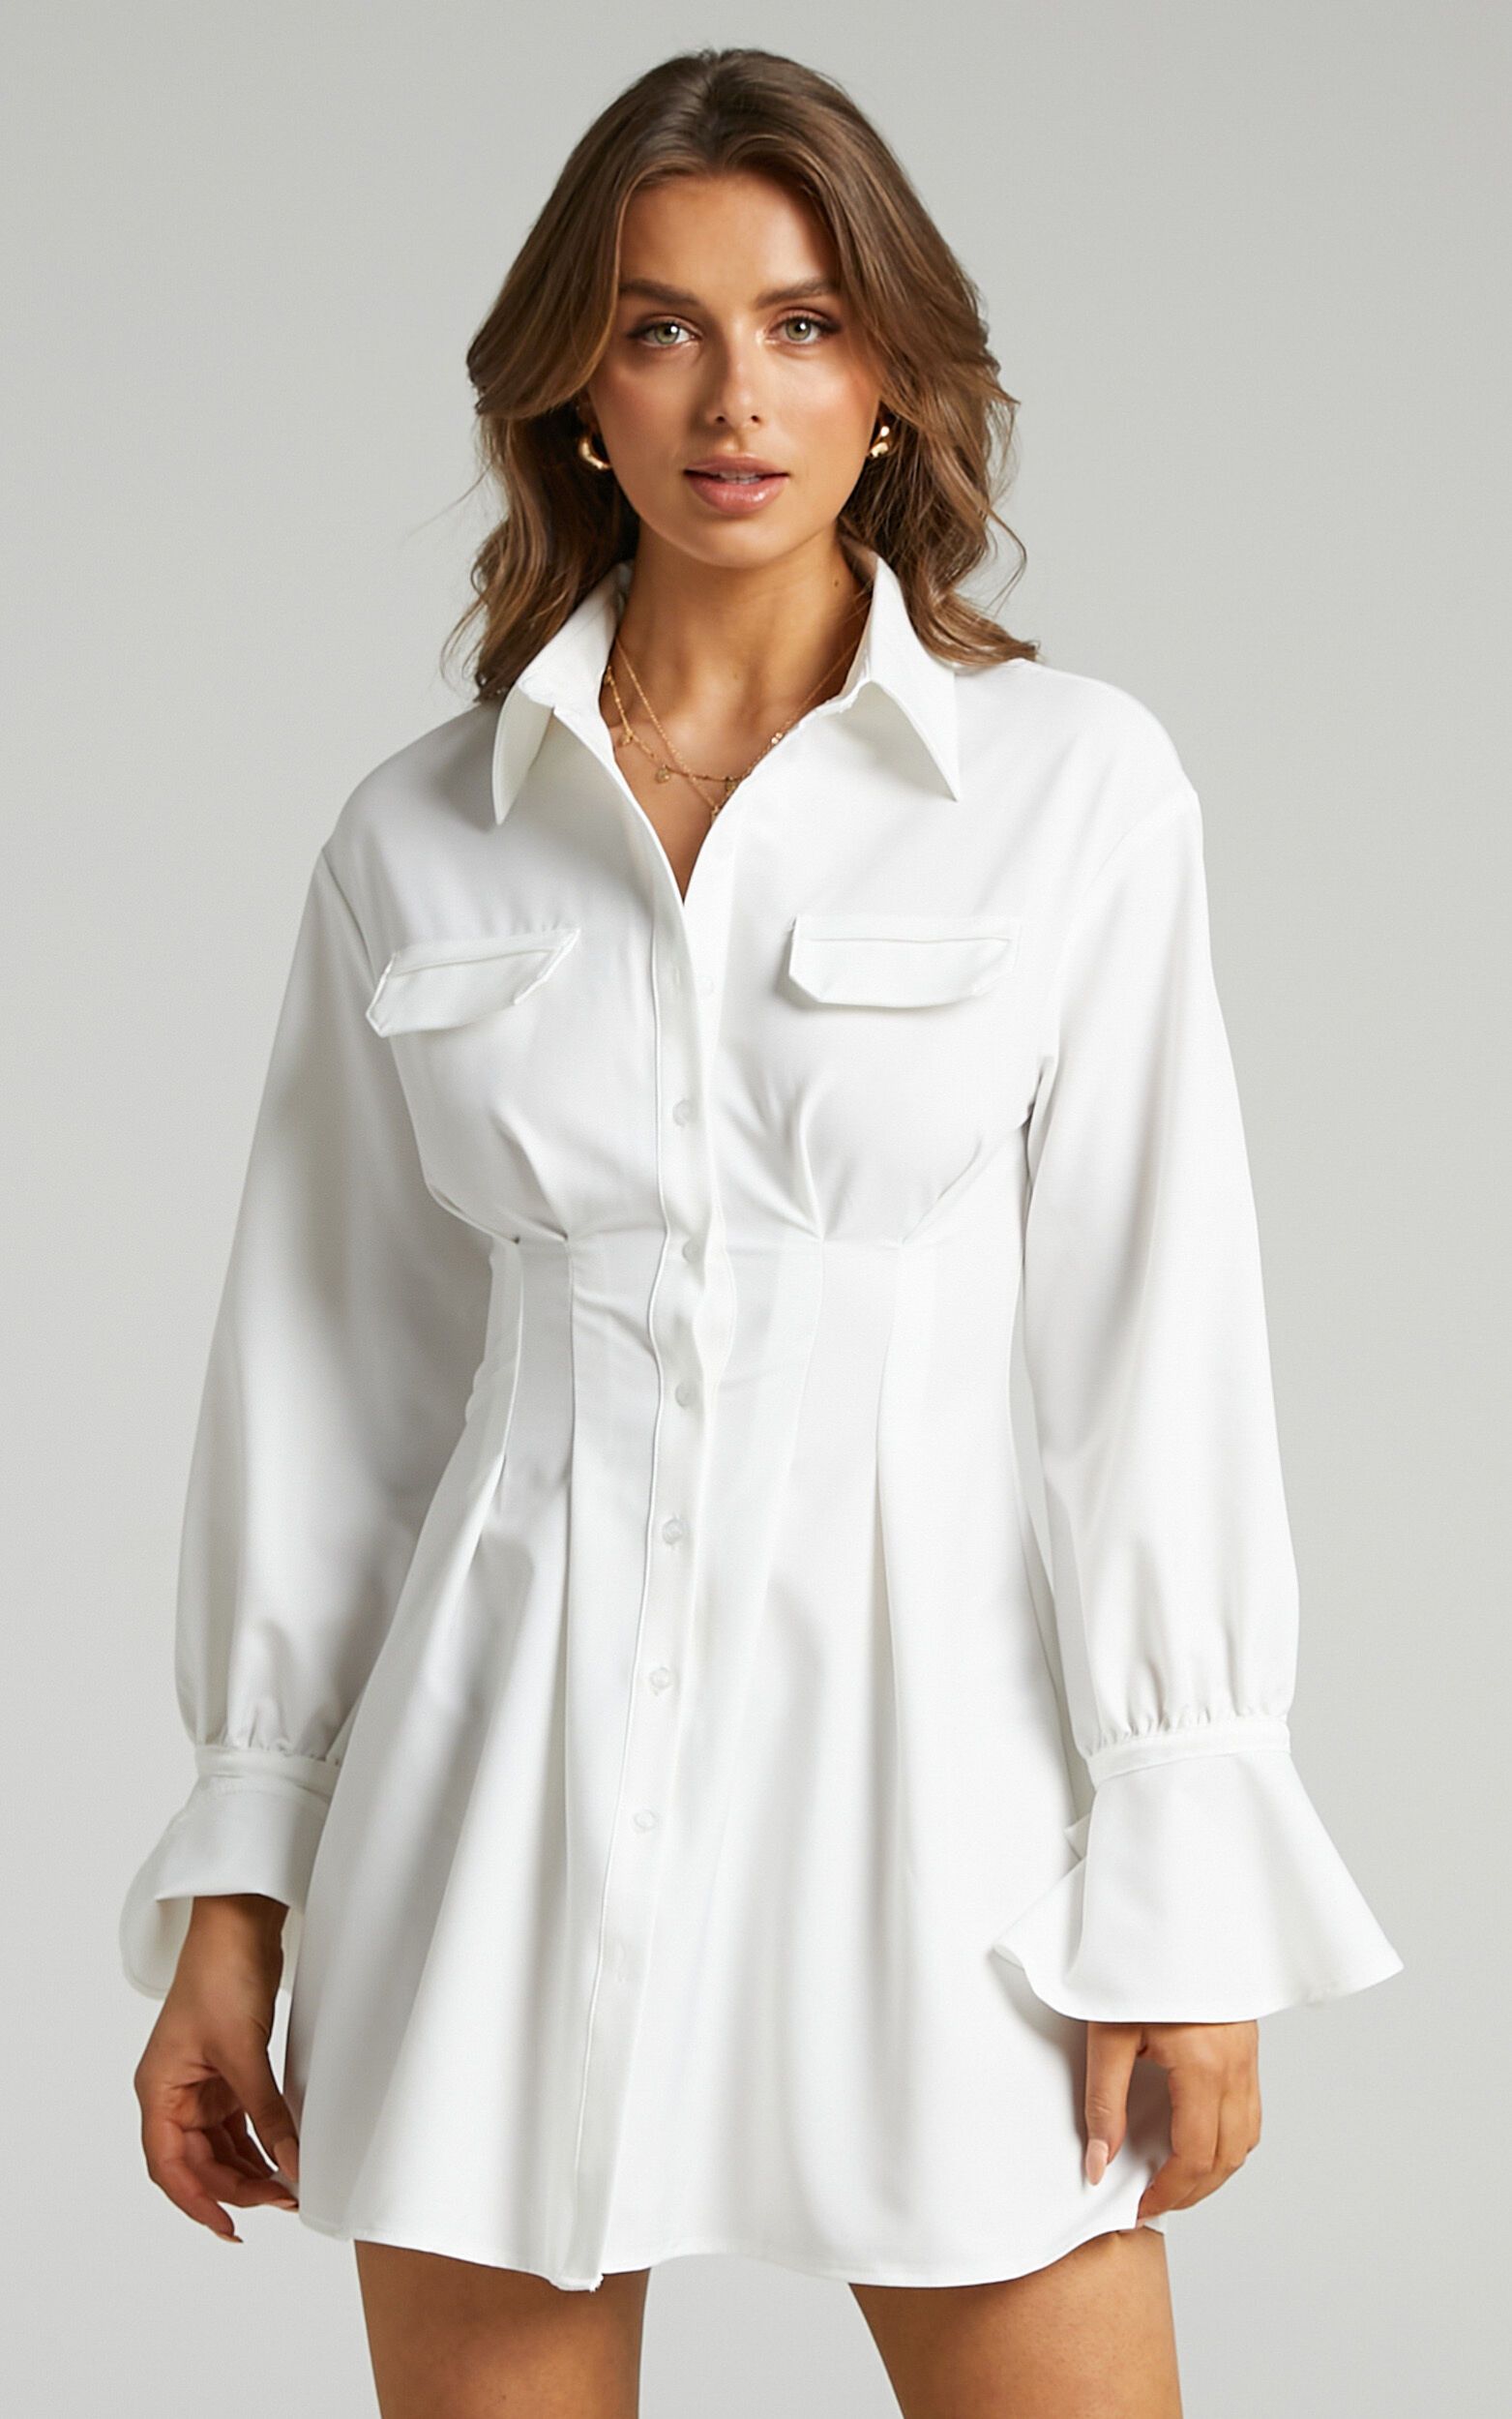 Romi Cuffed Long Sleeve Shirt Dress with Cinched Waist in White | Showpo - deactived